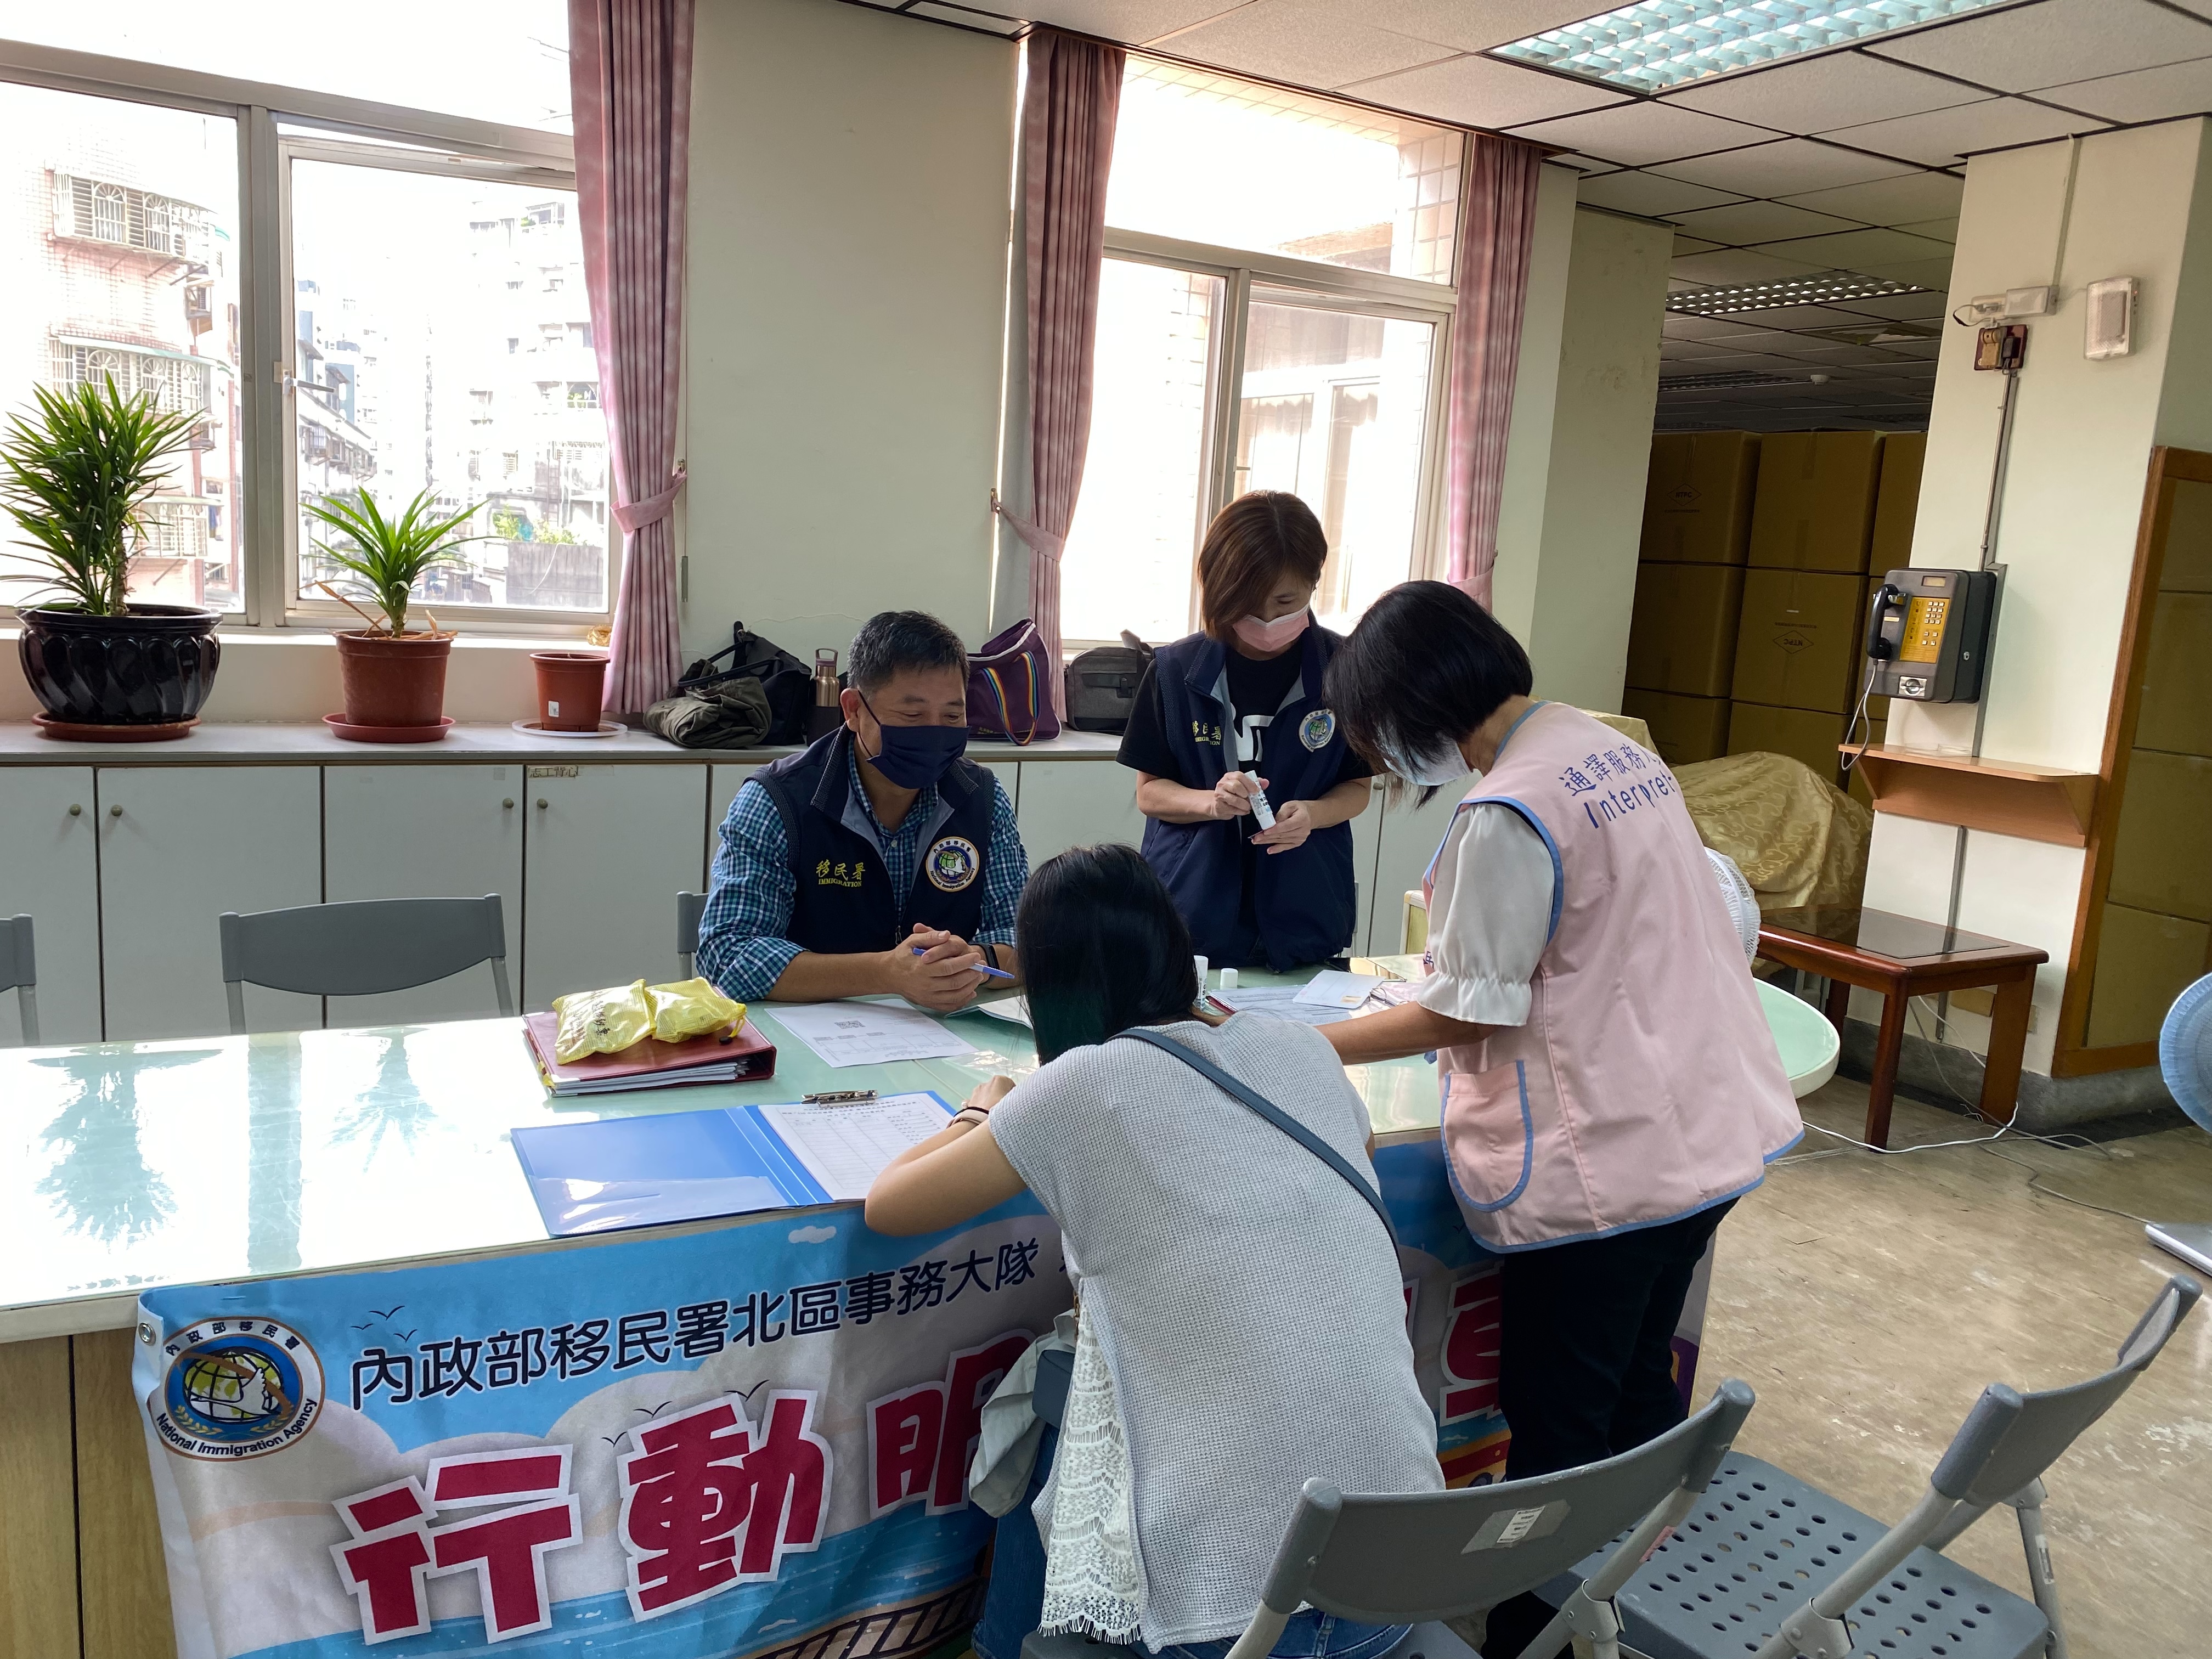 The mobile service unit launched by NIA has traveled to Sanchong to serve new immigrants. (Photo / Provided by New Taipei City, NIA)